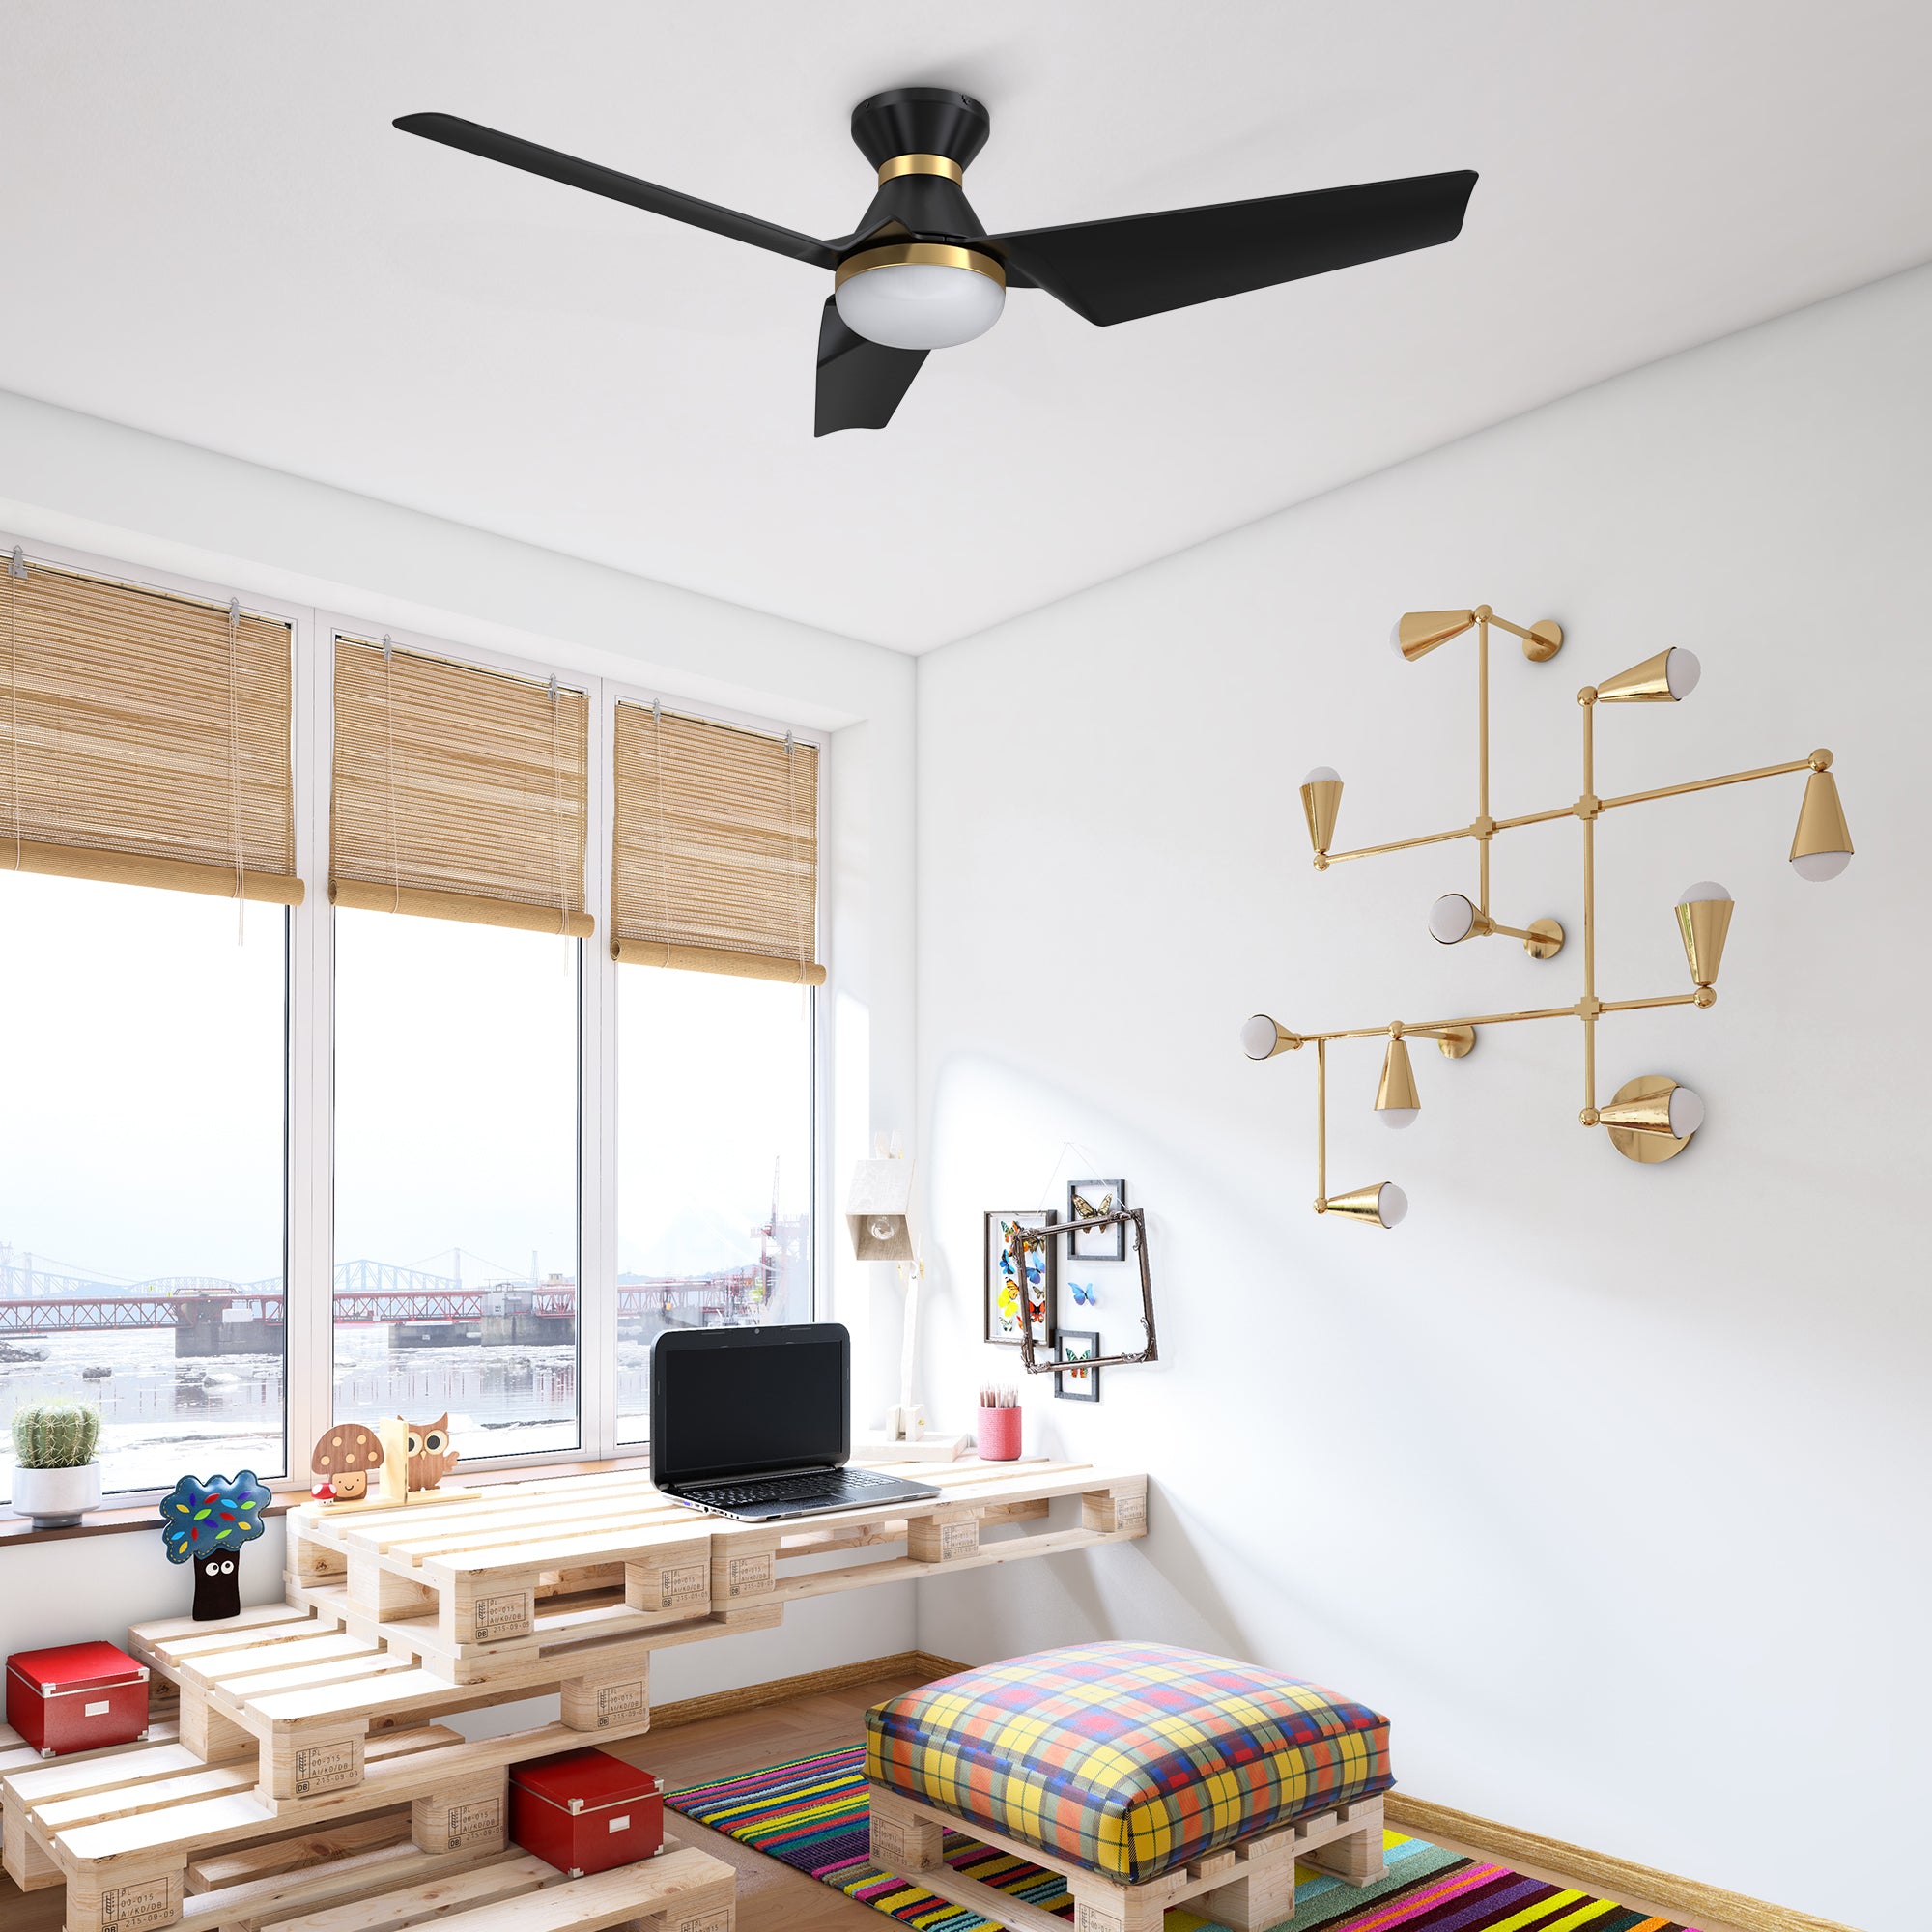 This Smafan Jett 52'' smart ceiling fan keeps your space cool, bright, and stylish. It is a soft modern masterpiece perfect for your large indoor living spaces. This Wifi smart ceiling fan is a simplicity designing with Black finish, use very strong ABS blades and has an integrated 4000K LED daylight.#color_Black&Gold